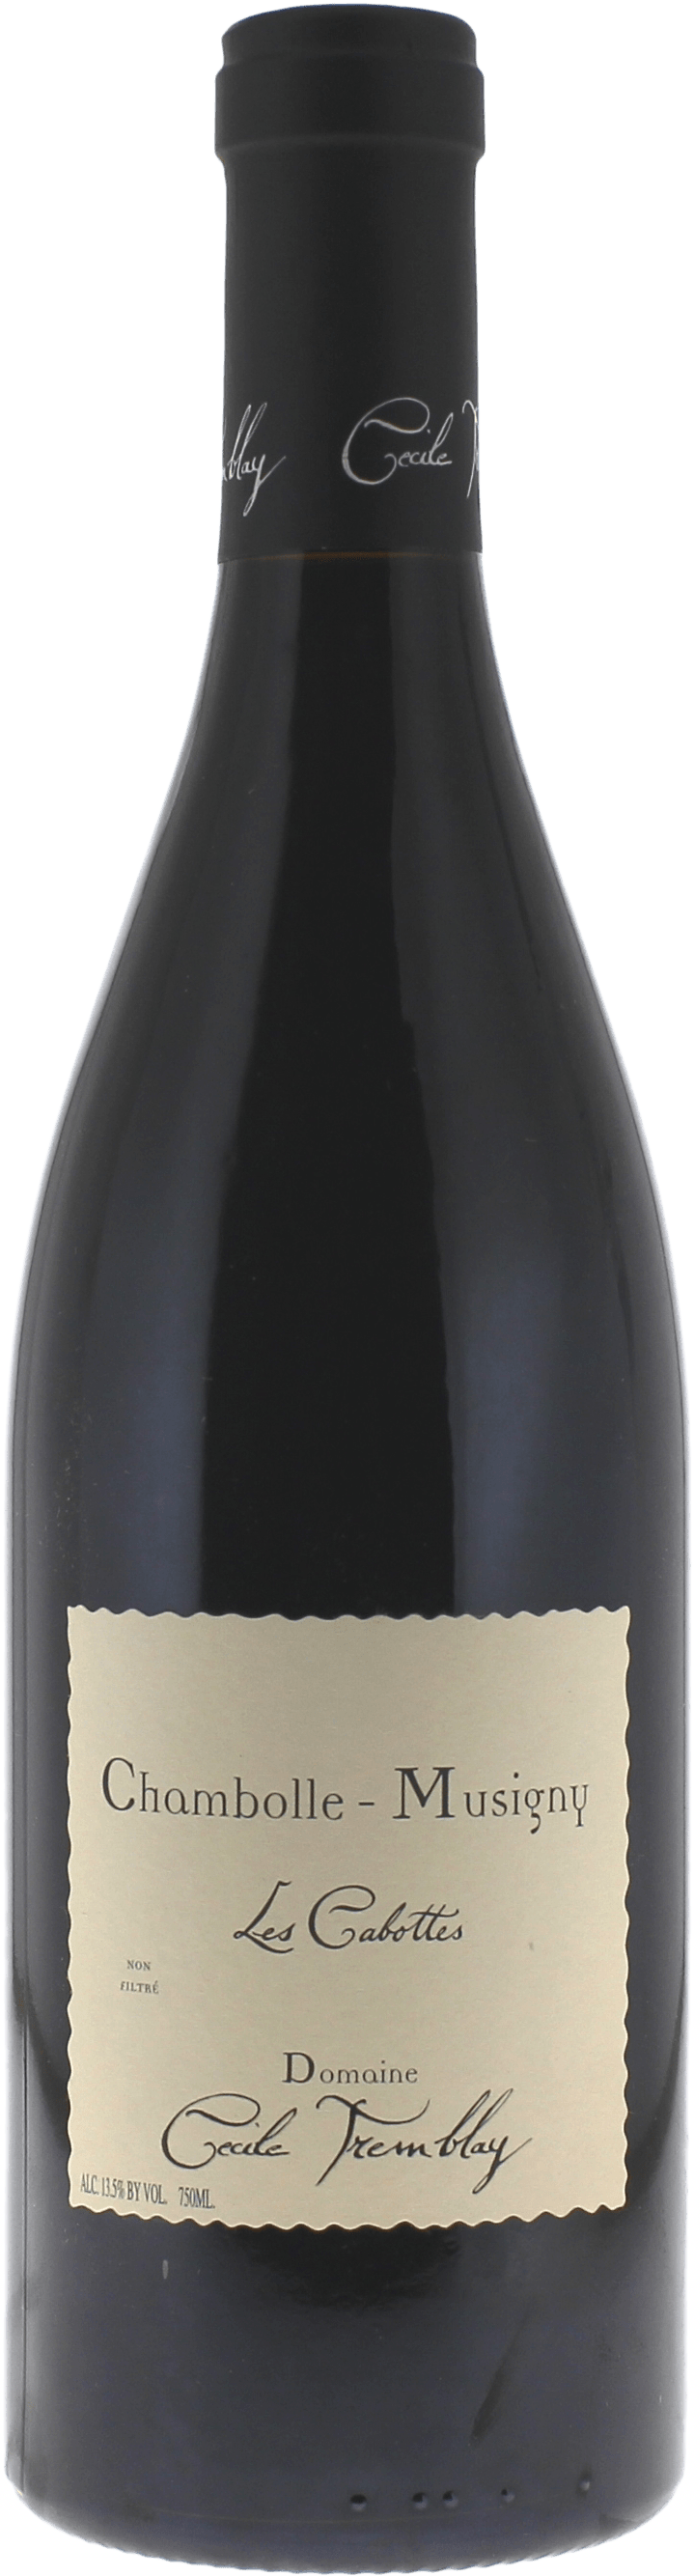 Chambolle musigny les cabottes 2013 Domaine TREMBLAY Cecile, Bourgogne rouge